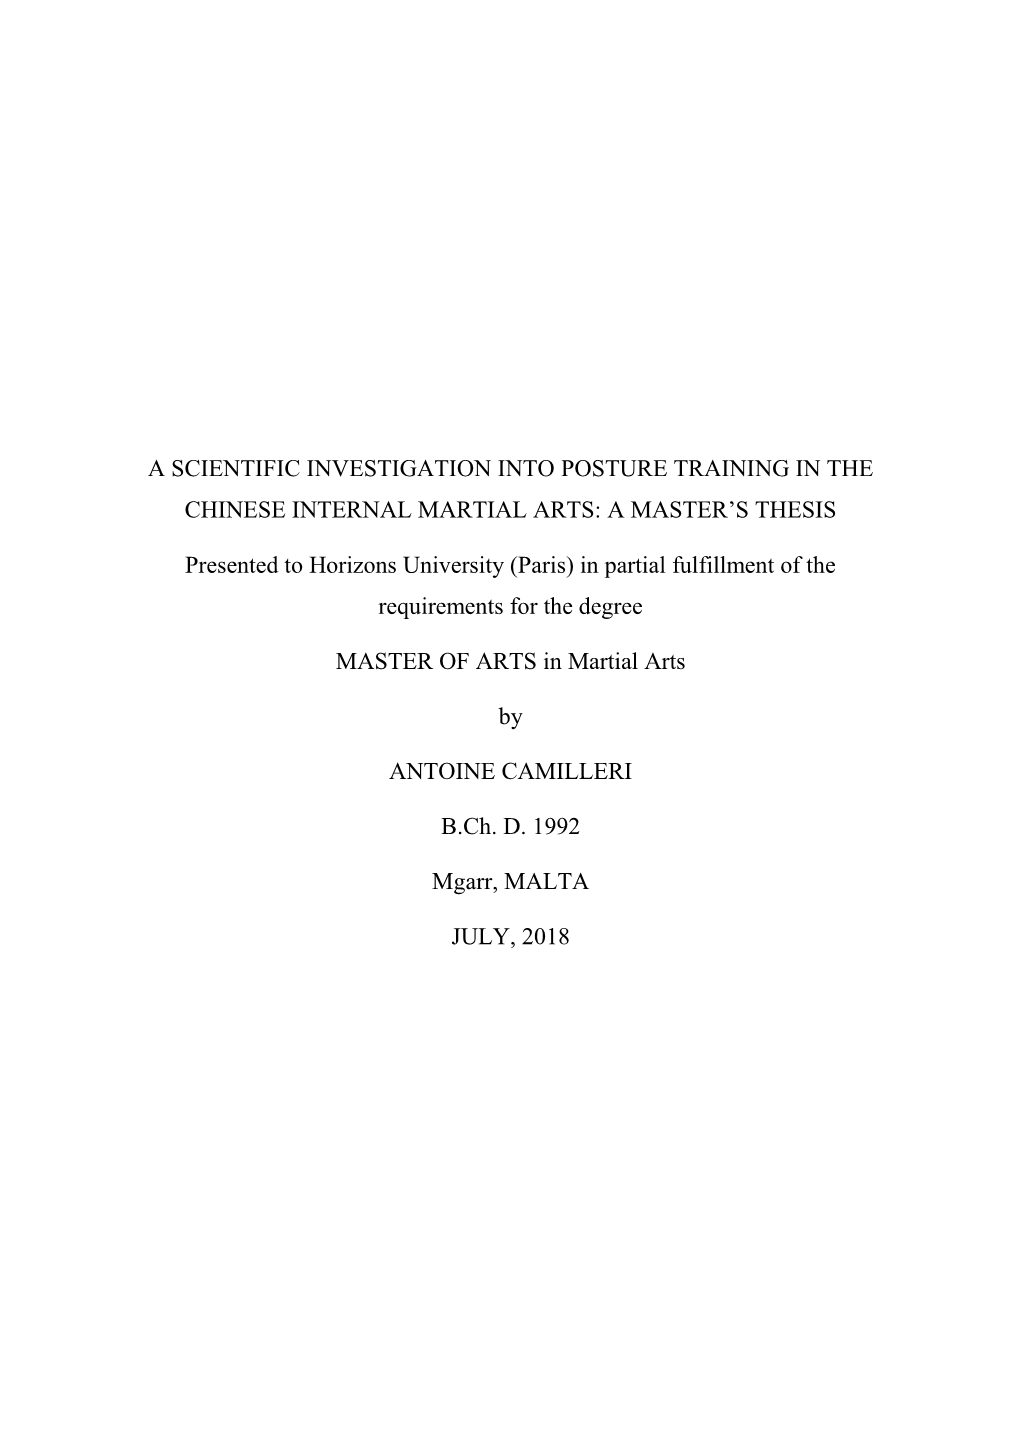 A Scientific Investigation Into Posture Training in the Chinese Internal Martial Arts: a Master’S Thesis